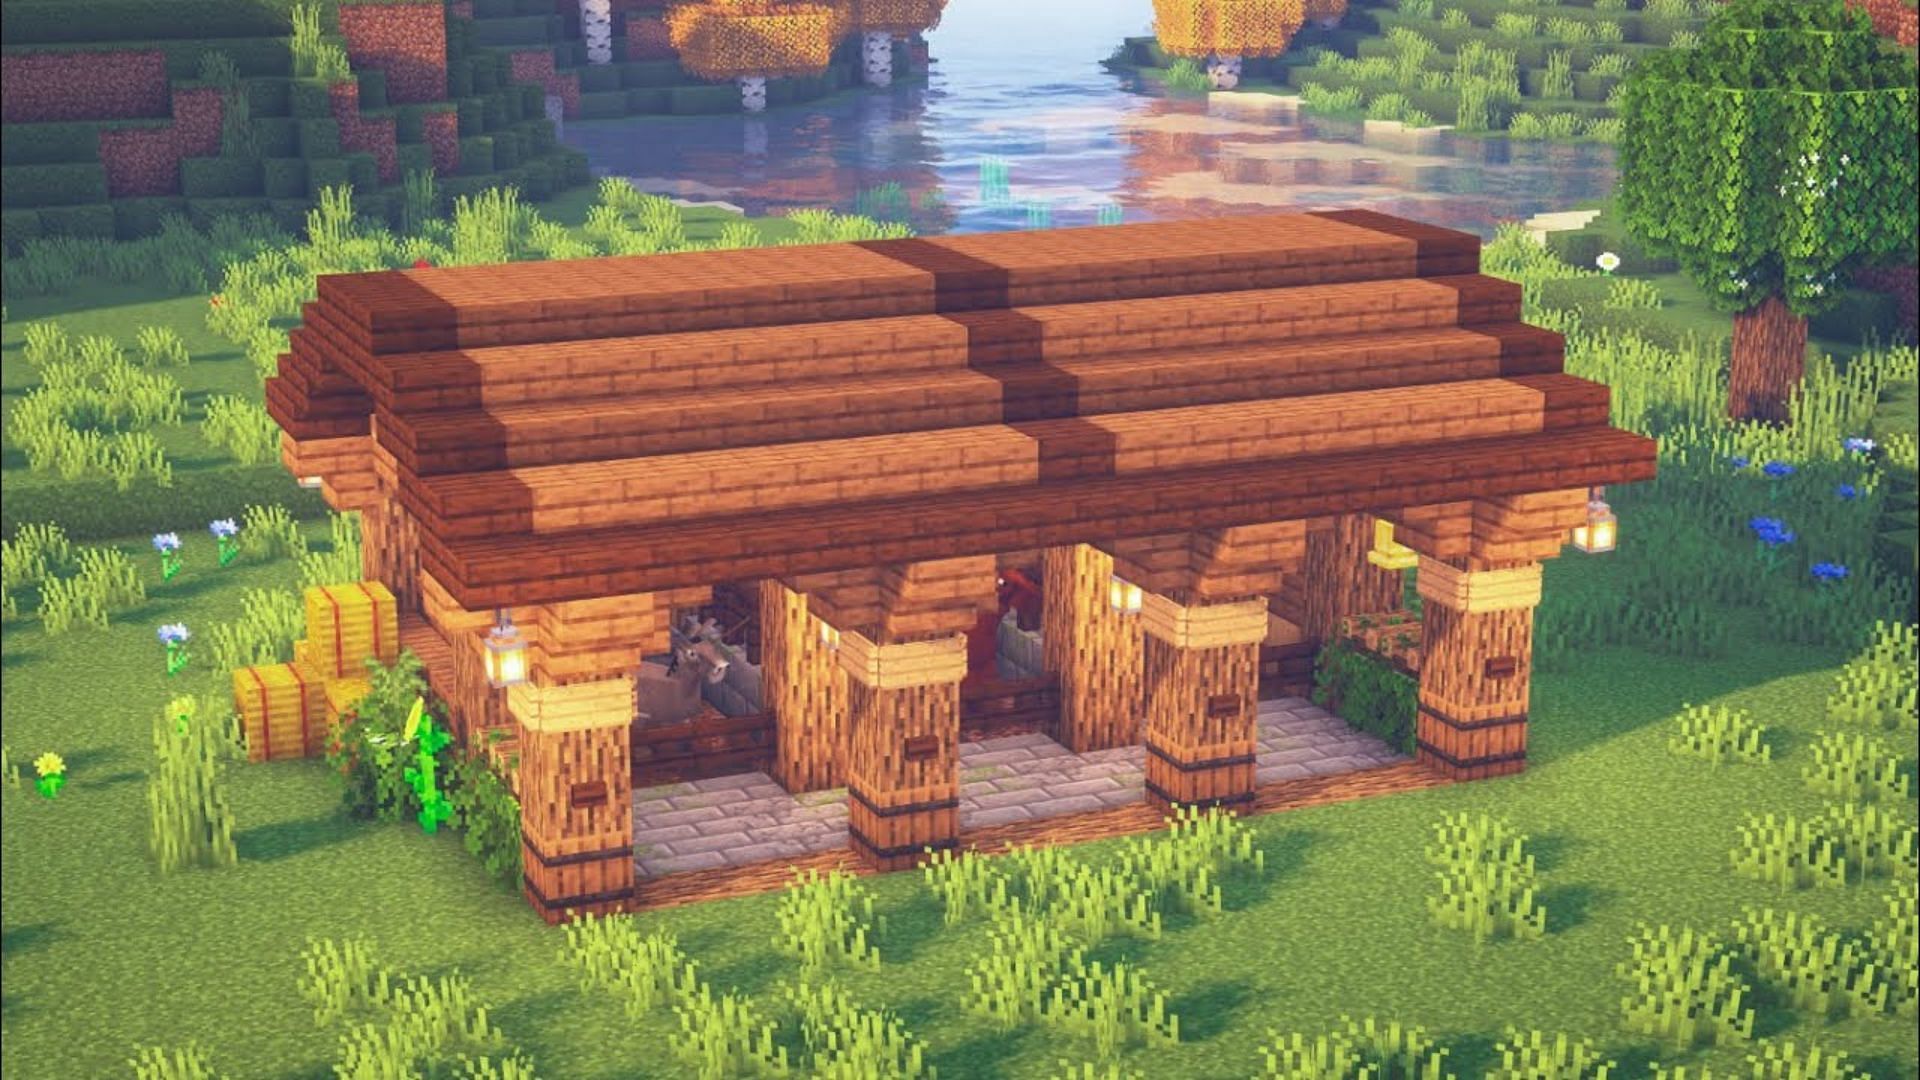 Minecraft barns can vary in design (Image via Zaypixel on YouTube)